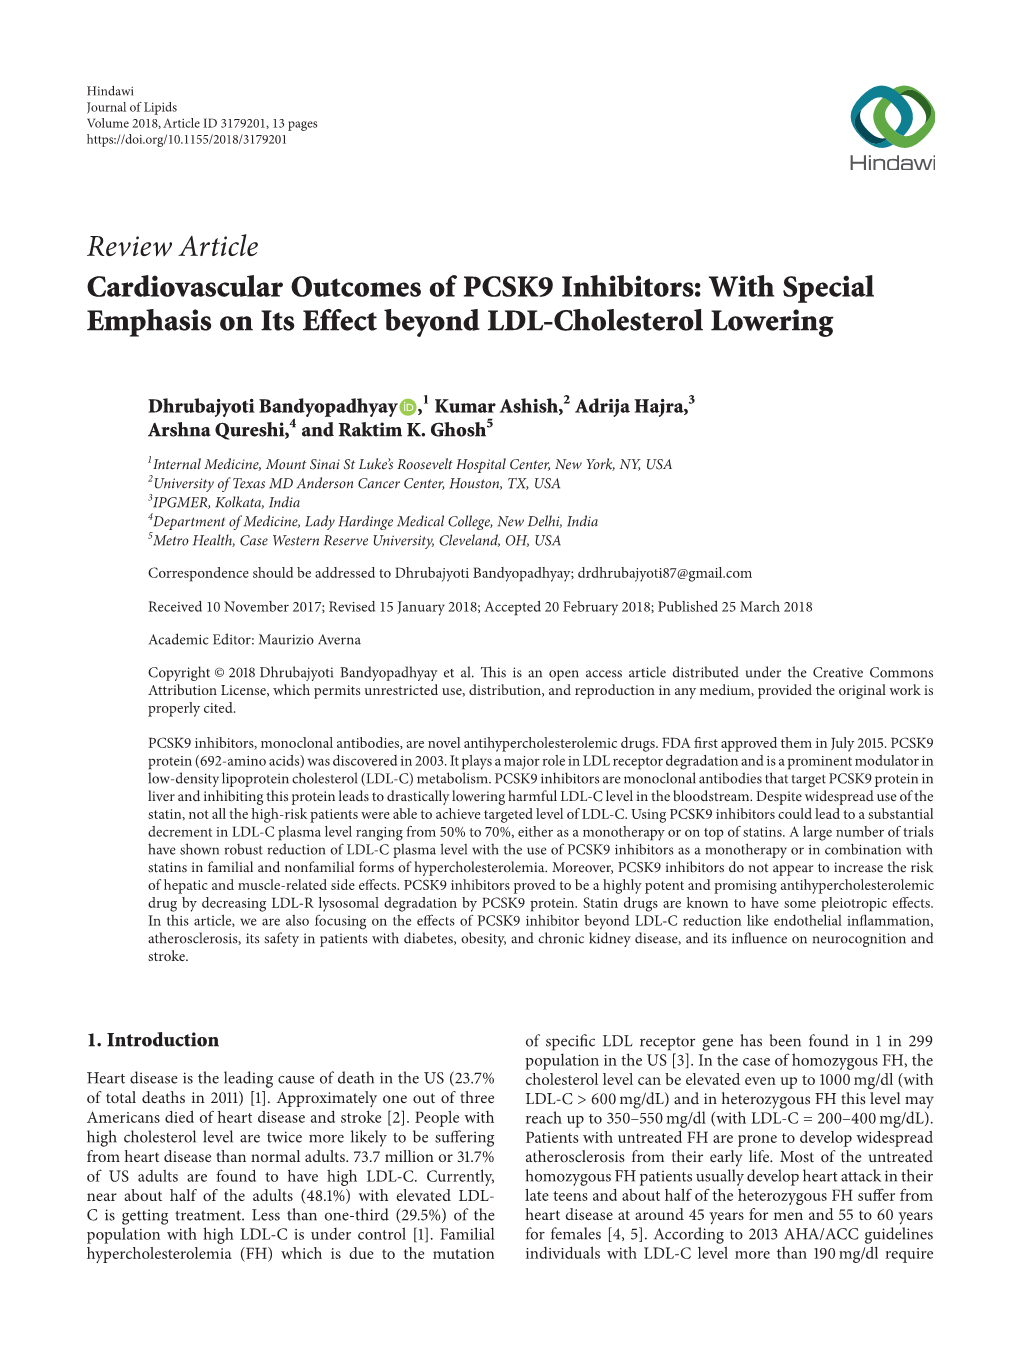 Review Article Cardiovascular Outcomes of PCSK9 Inhibitors: with Special Emphasis on Its Effect Beyond LDL-Cholesterol Lowering